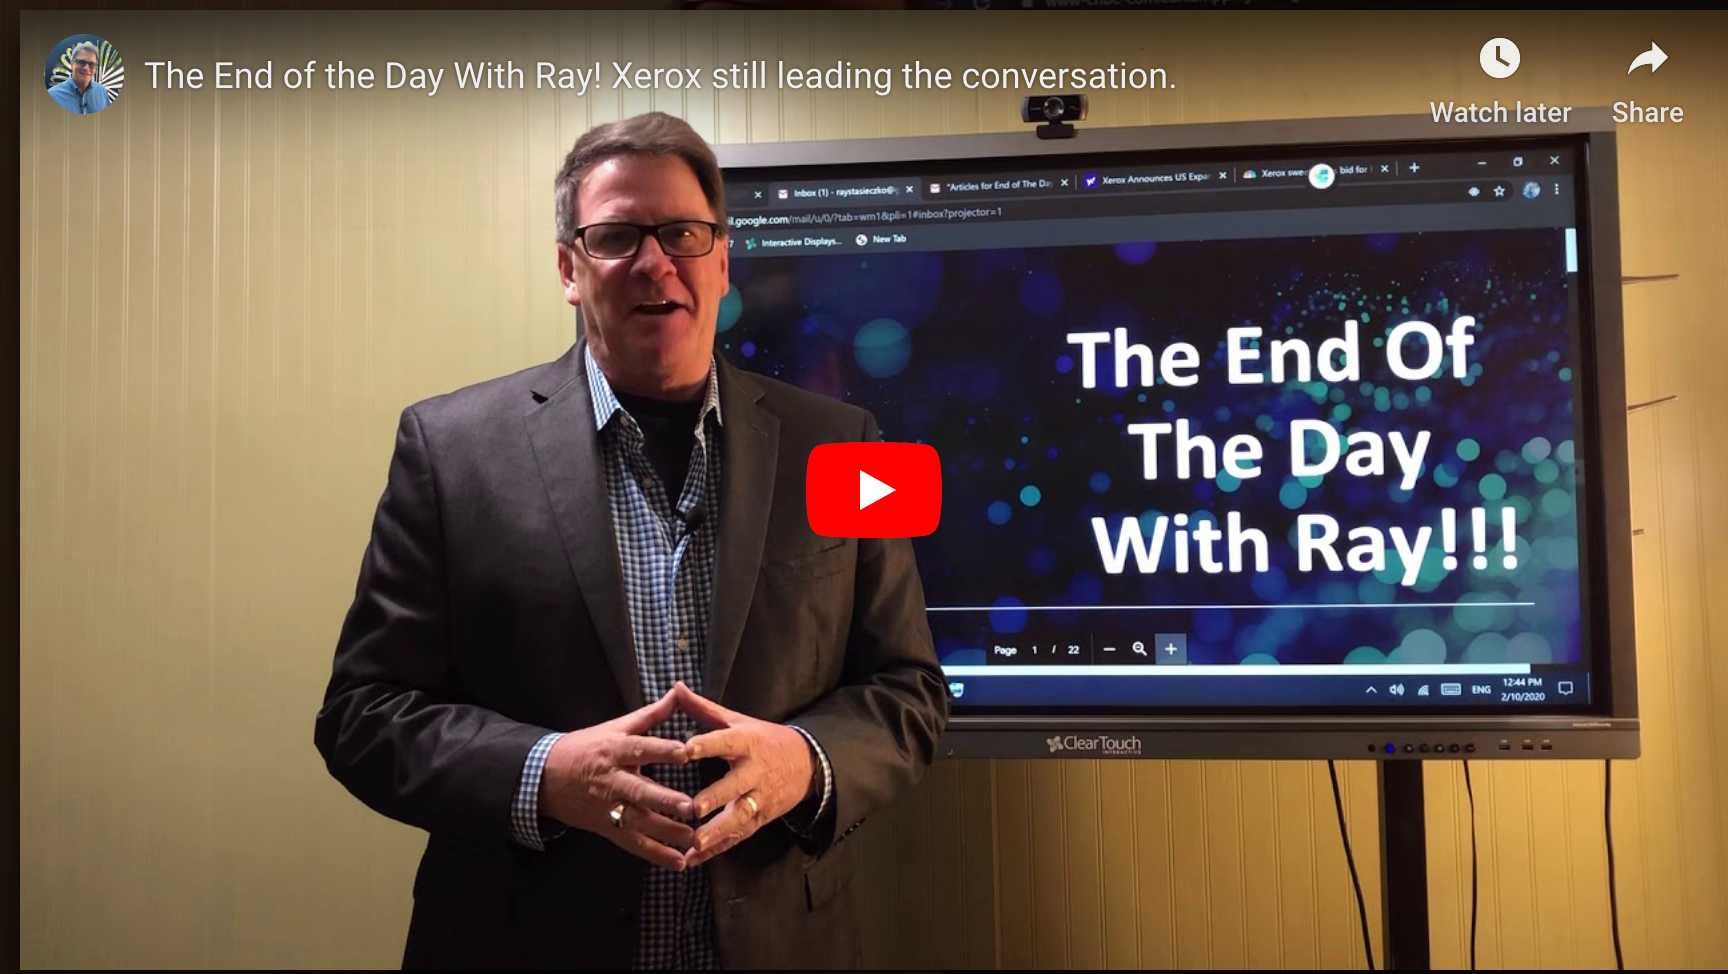 The End of the Day With Ray! Xerox still leading the conversation.